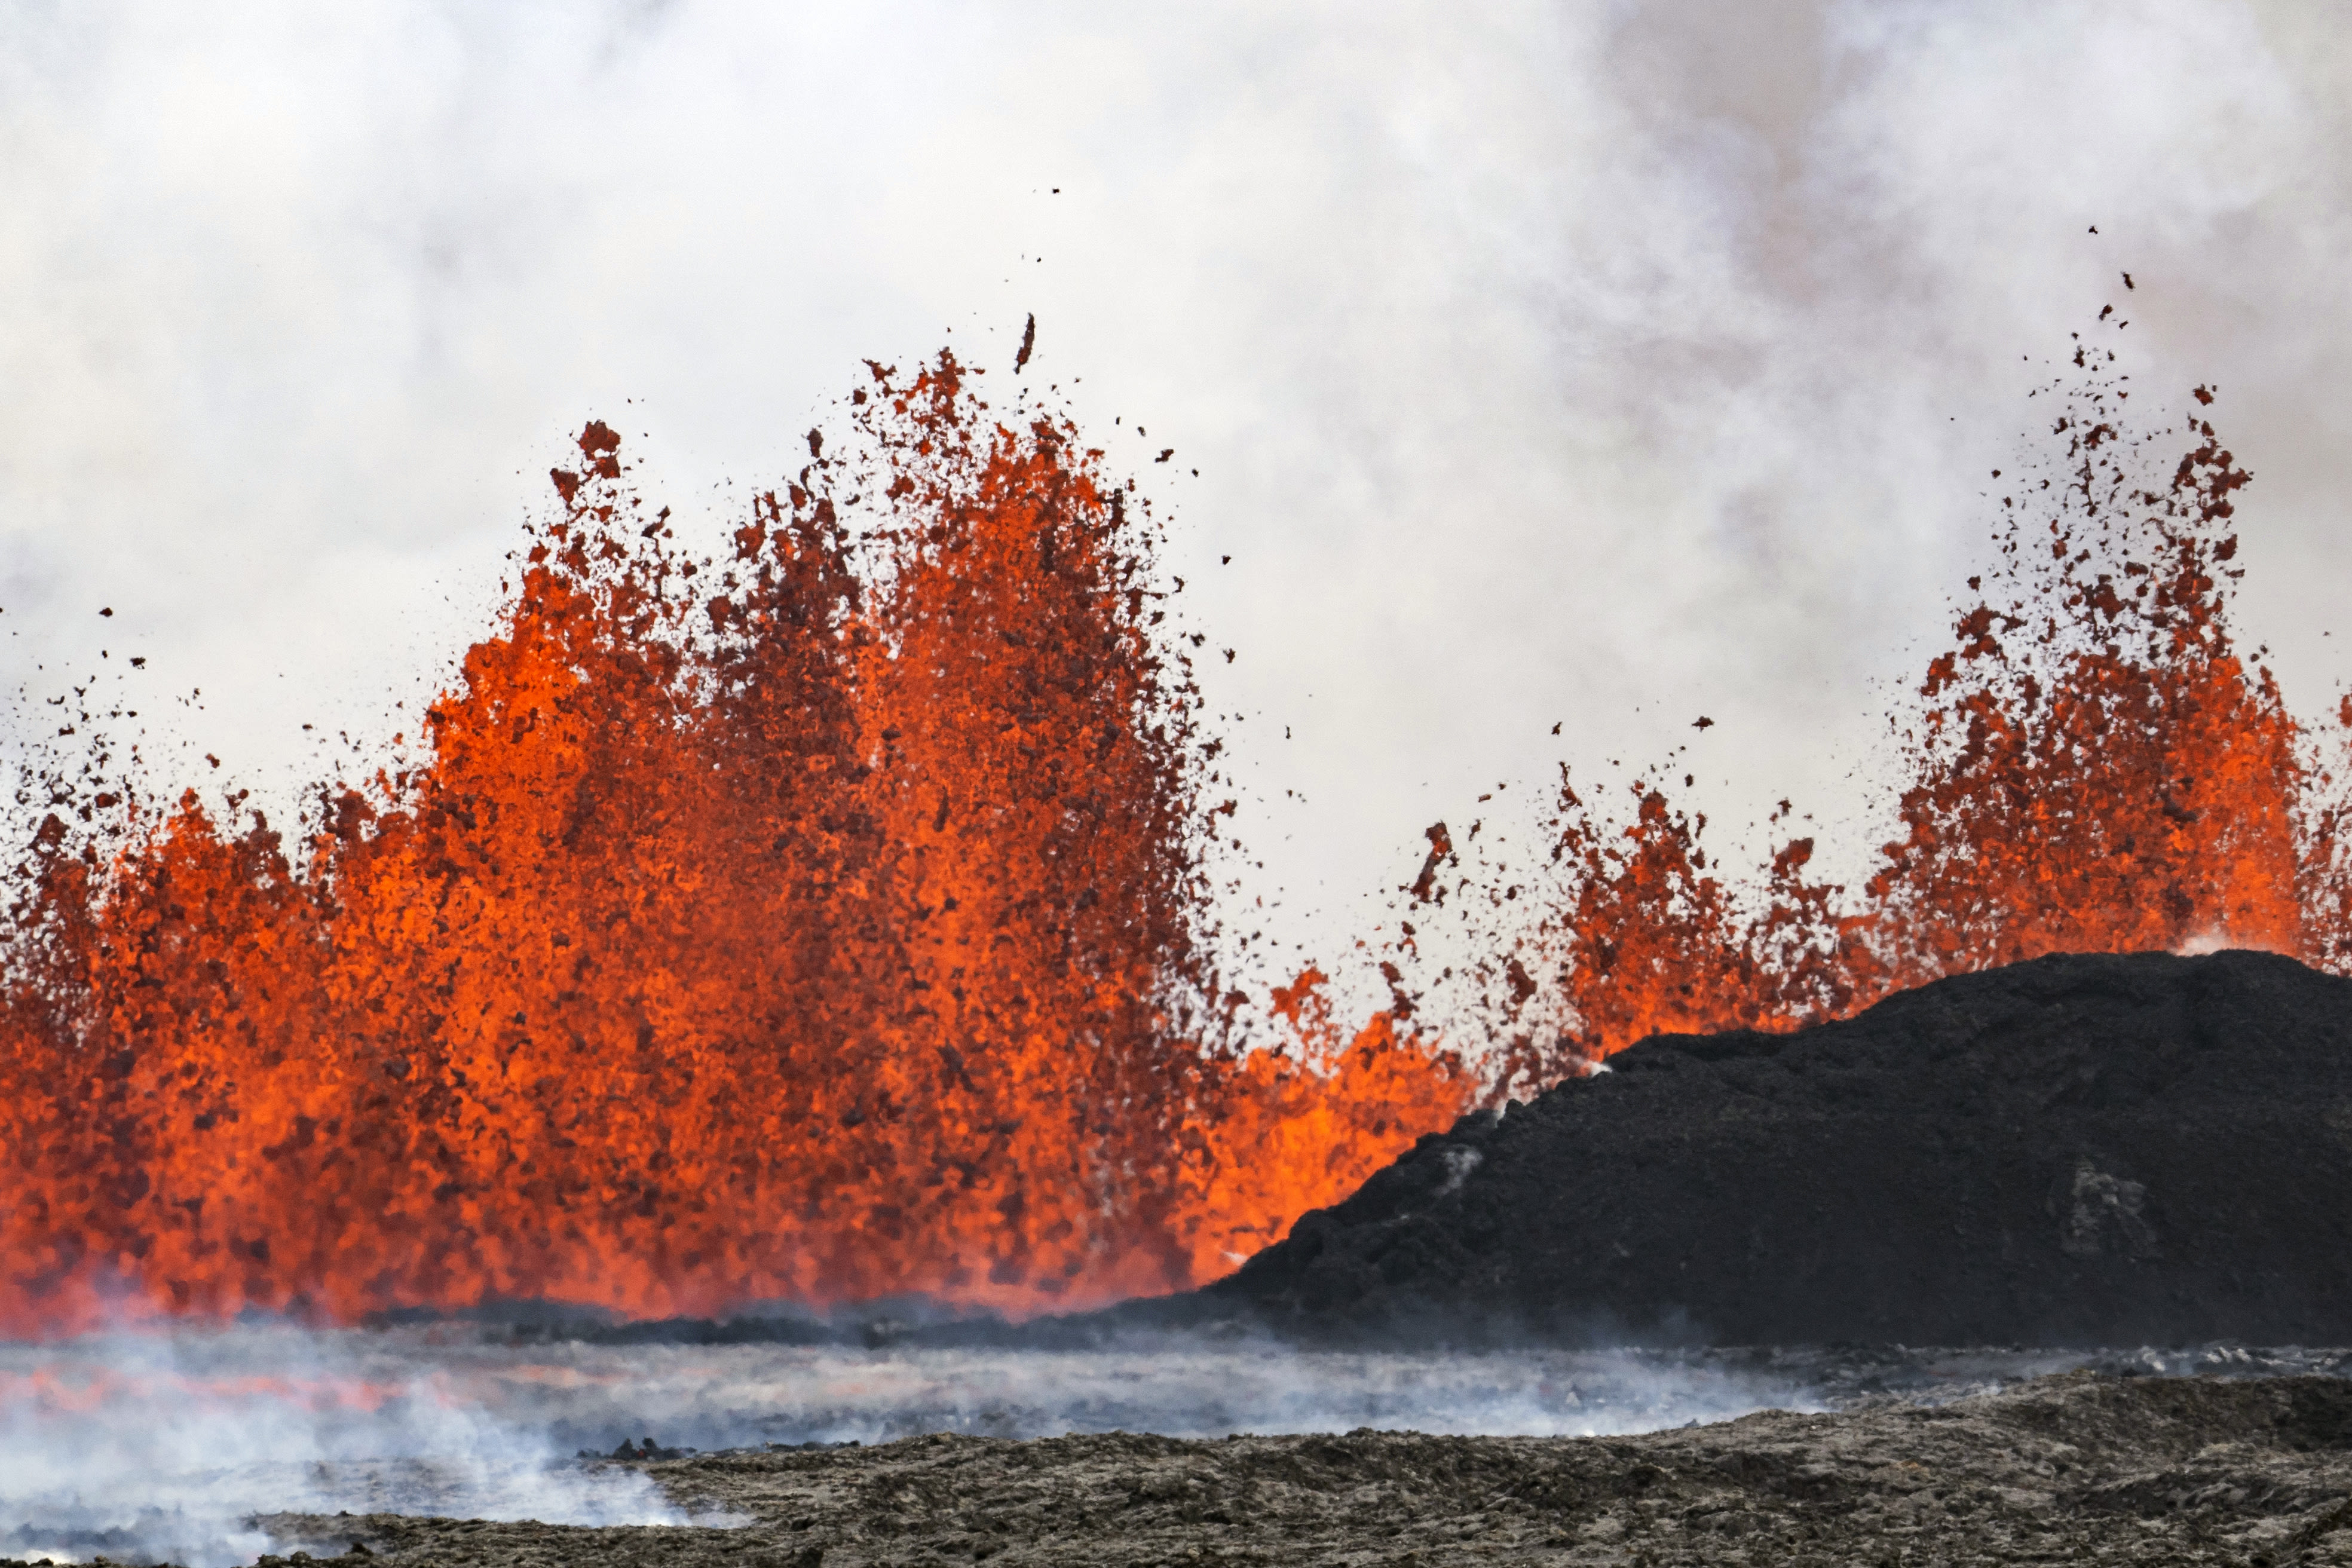 Watch live: A volcano in Iceland erupted again, shooting lava more than 100 feet high